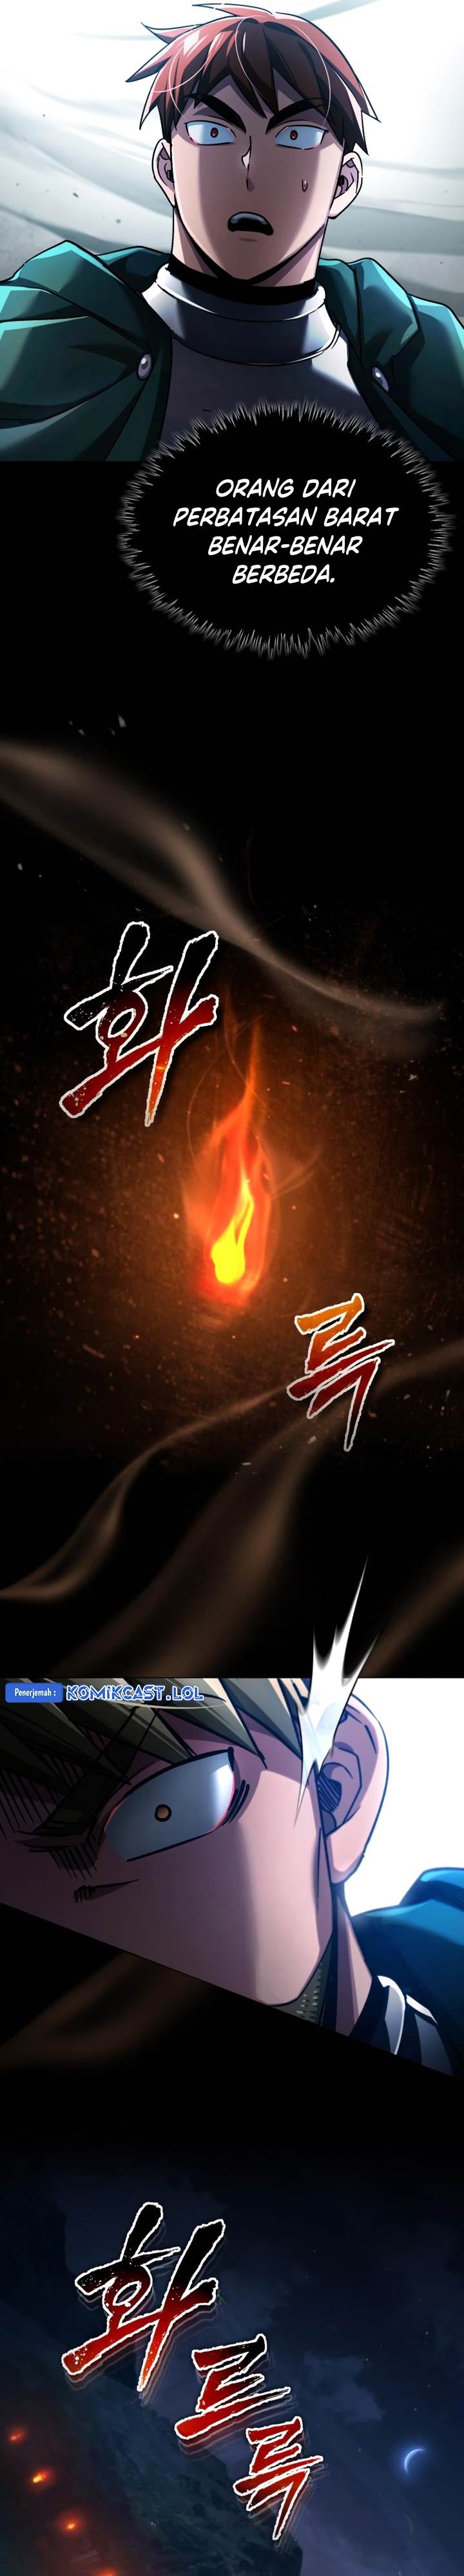 The Heavenly Demon Can’t Live a Normal Life Chapter 100